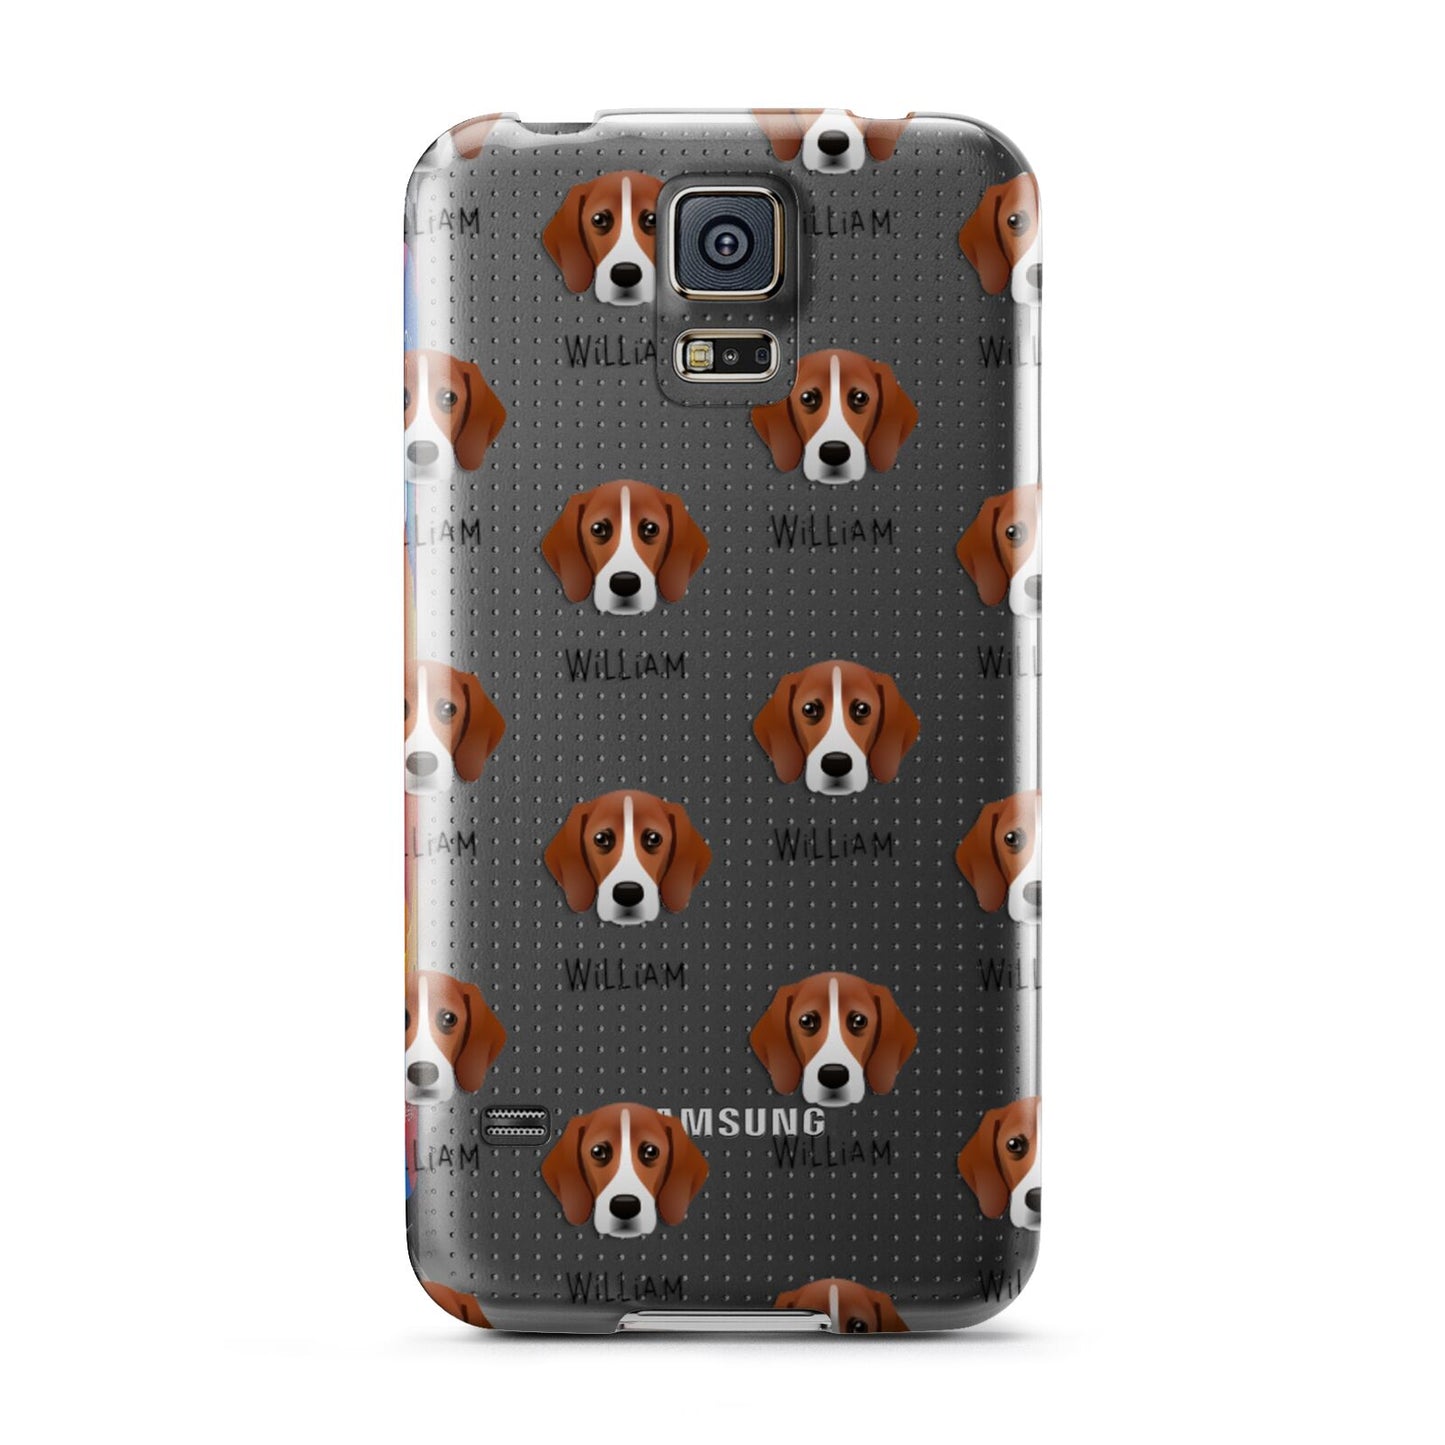 Bassugg Icon with Name Samsung Galaxy S5 Case